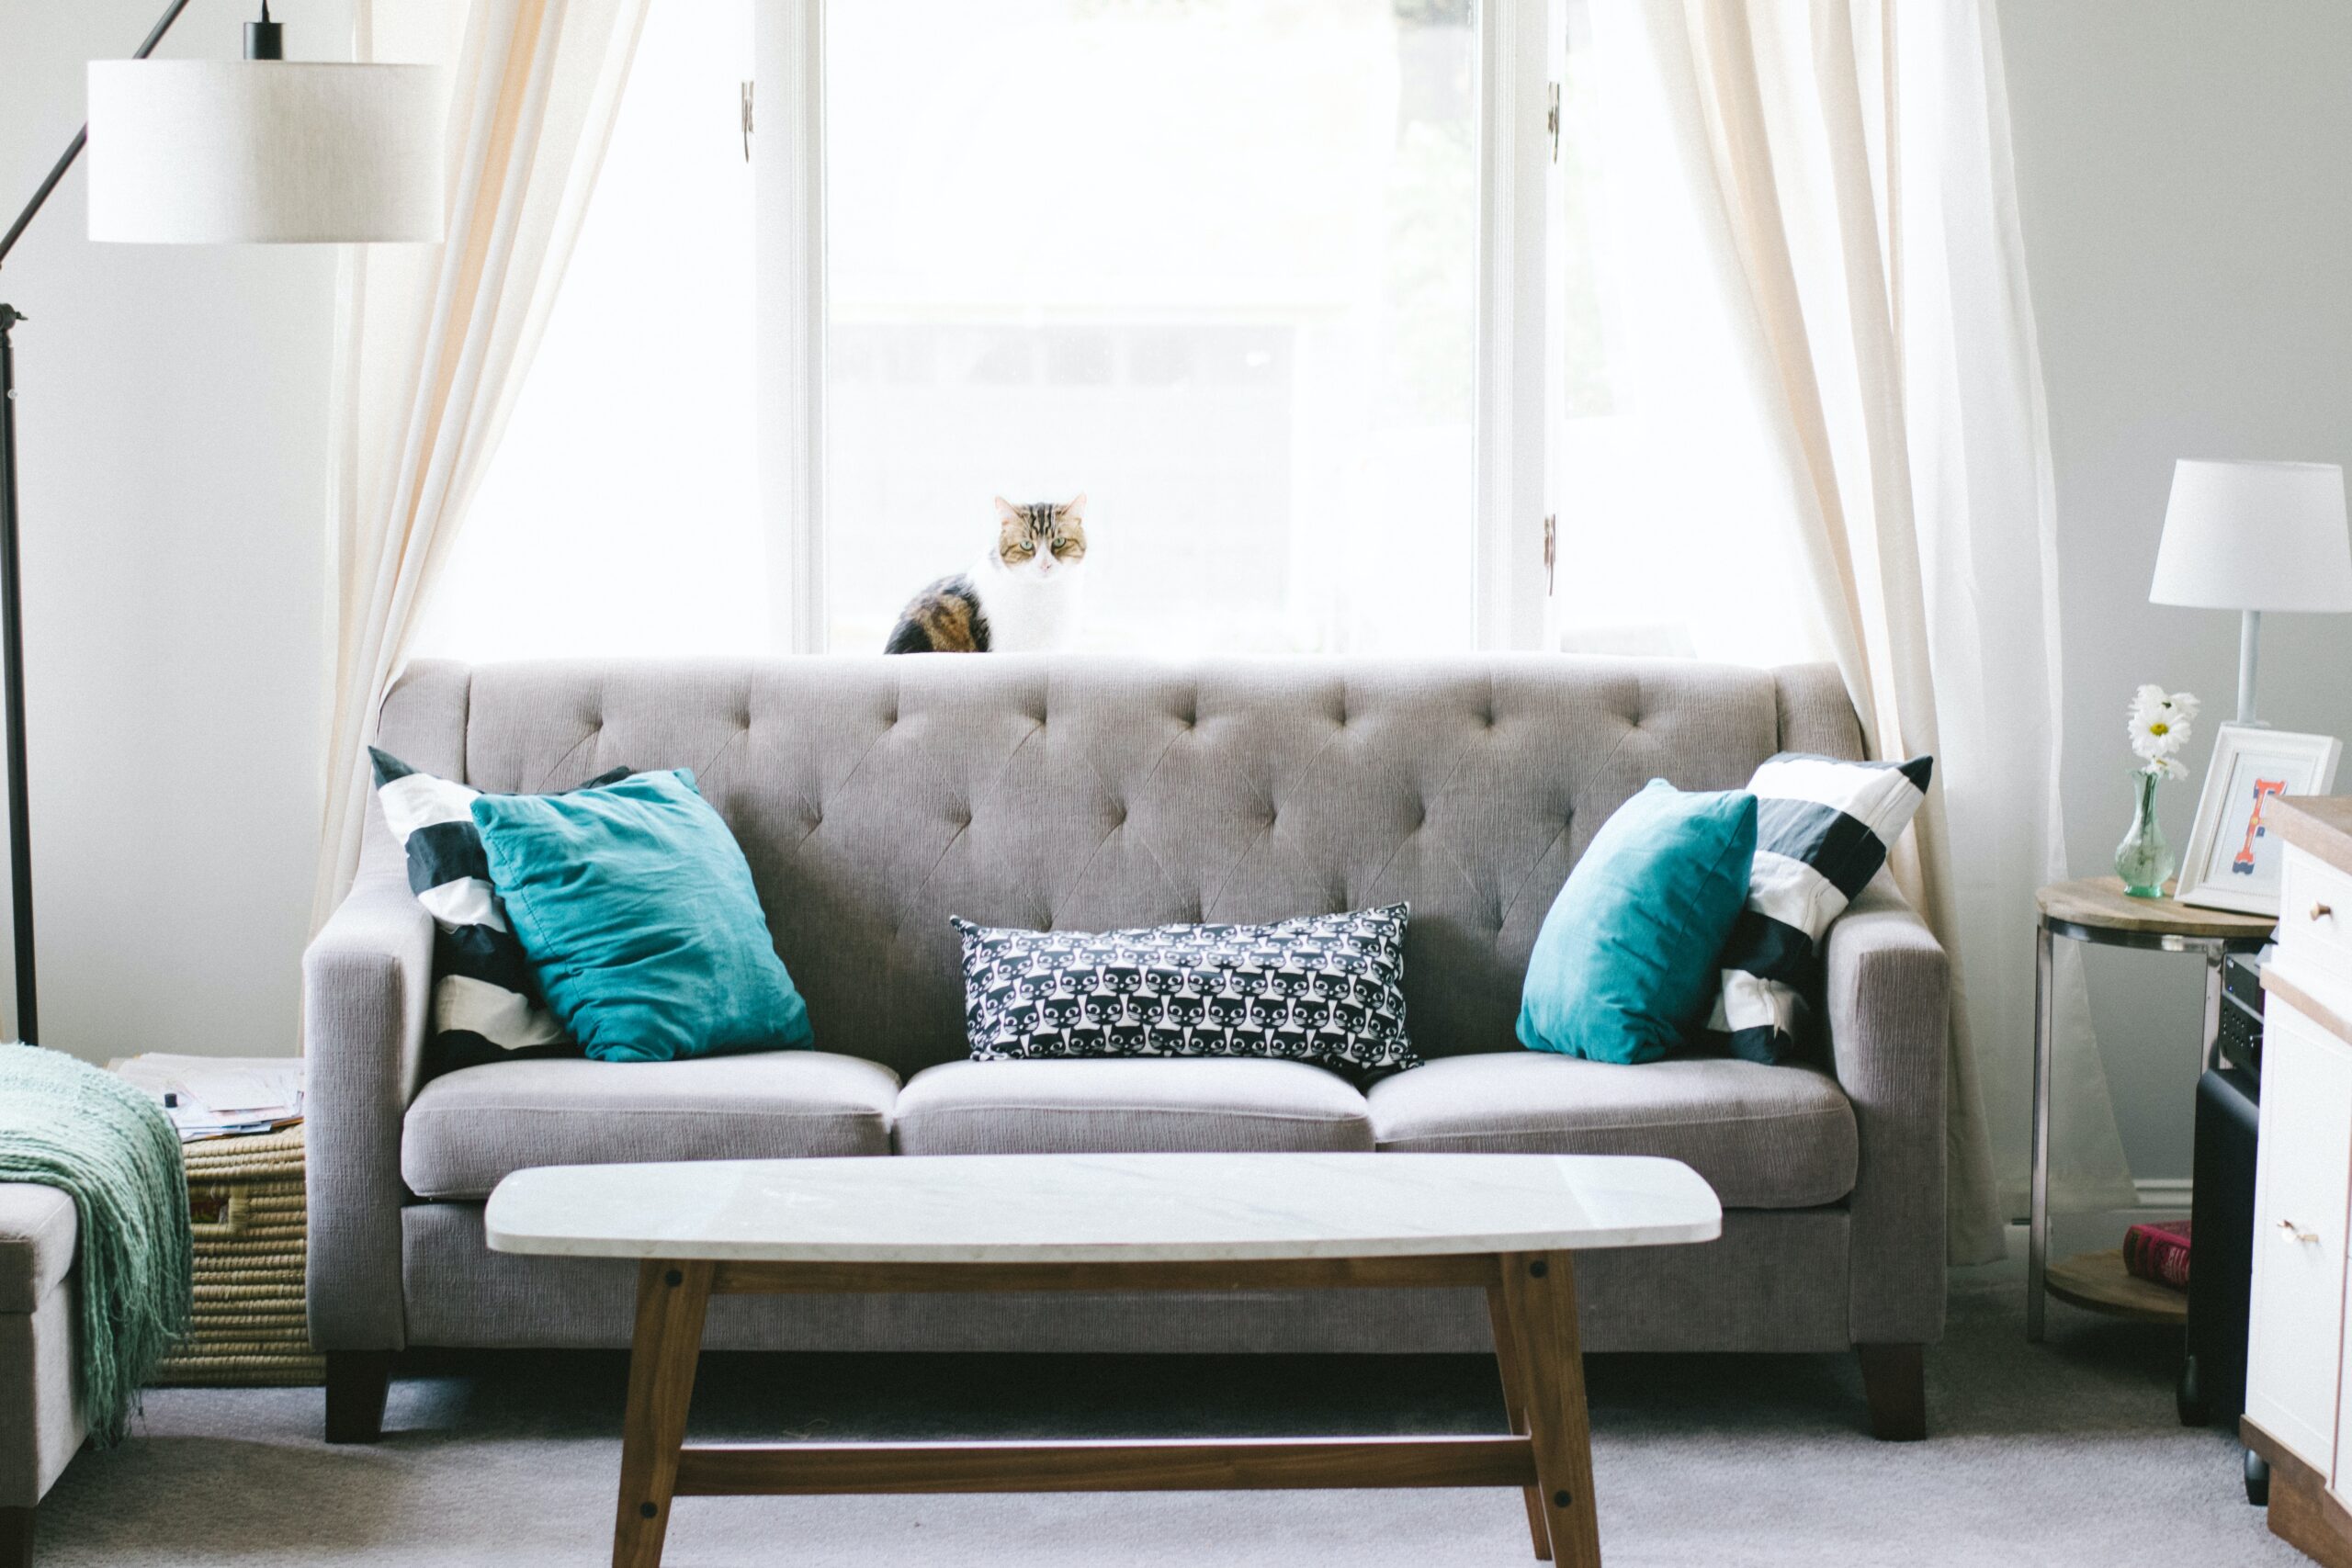 "How to Clean and Maintain Your Sofa for Longevity"